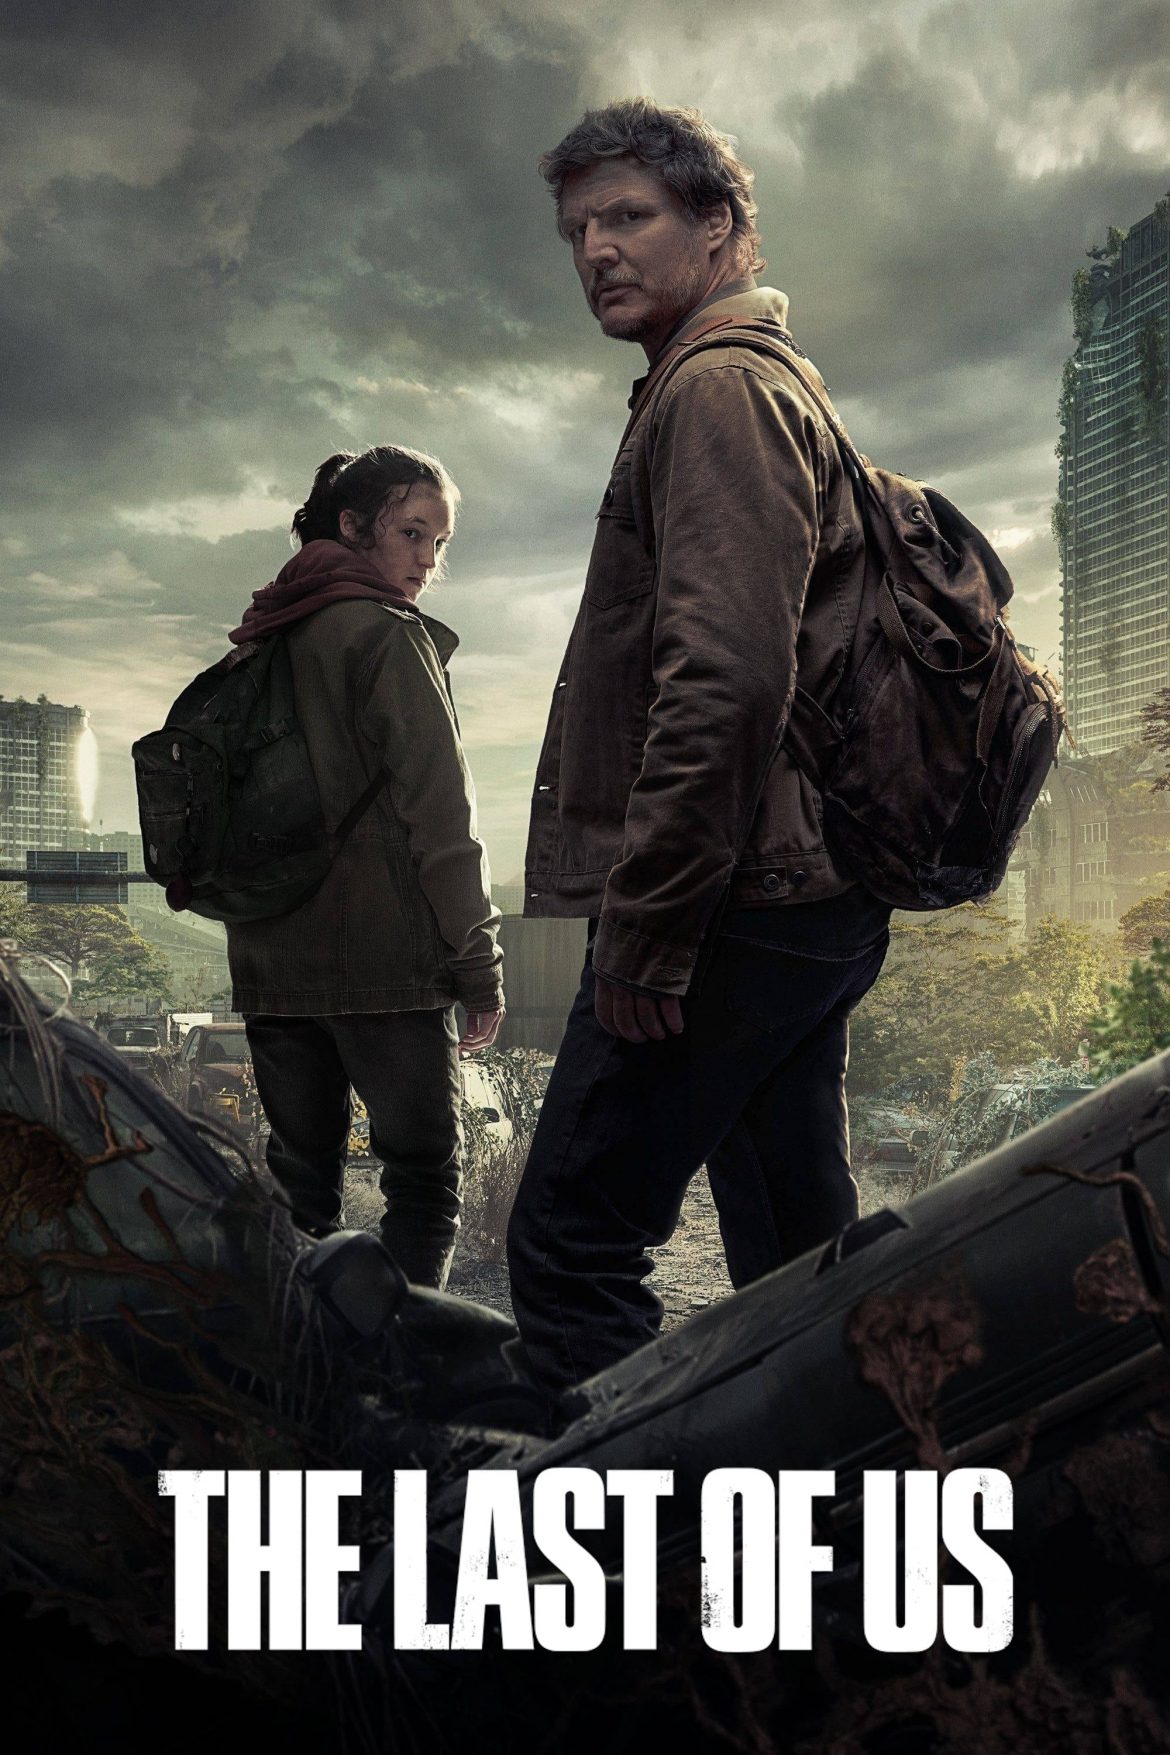 Why The Last of Us TV Show Is Such A Hit? Pedro Pascal Is Not The Only Reason